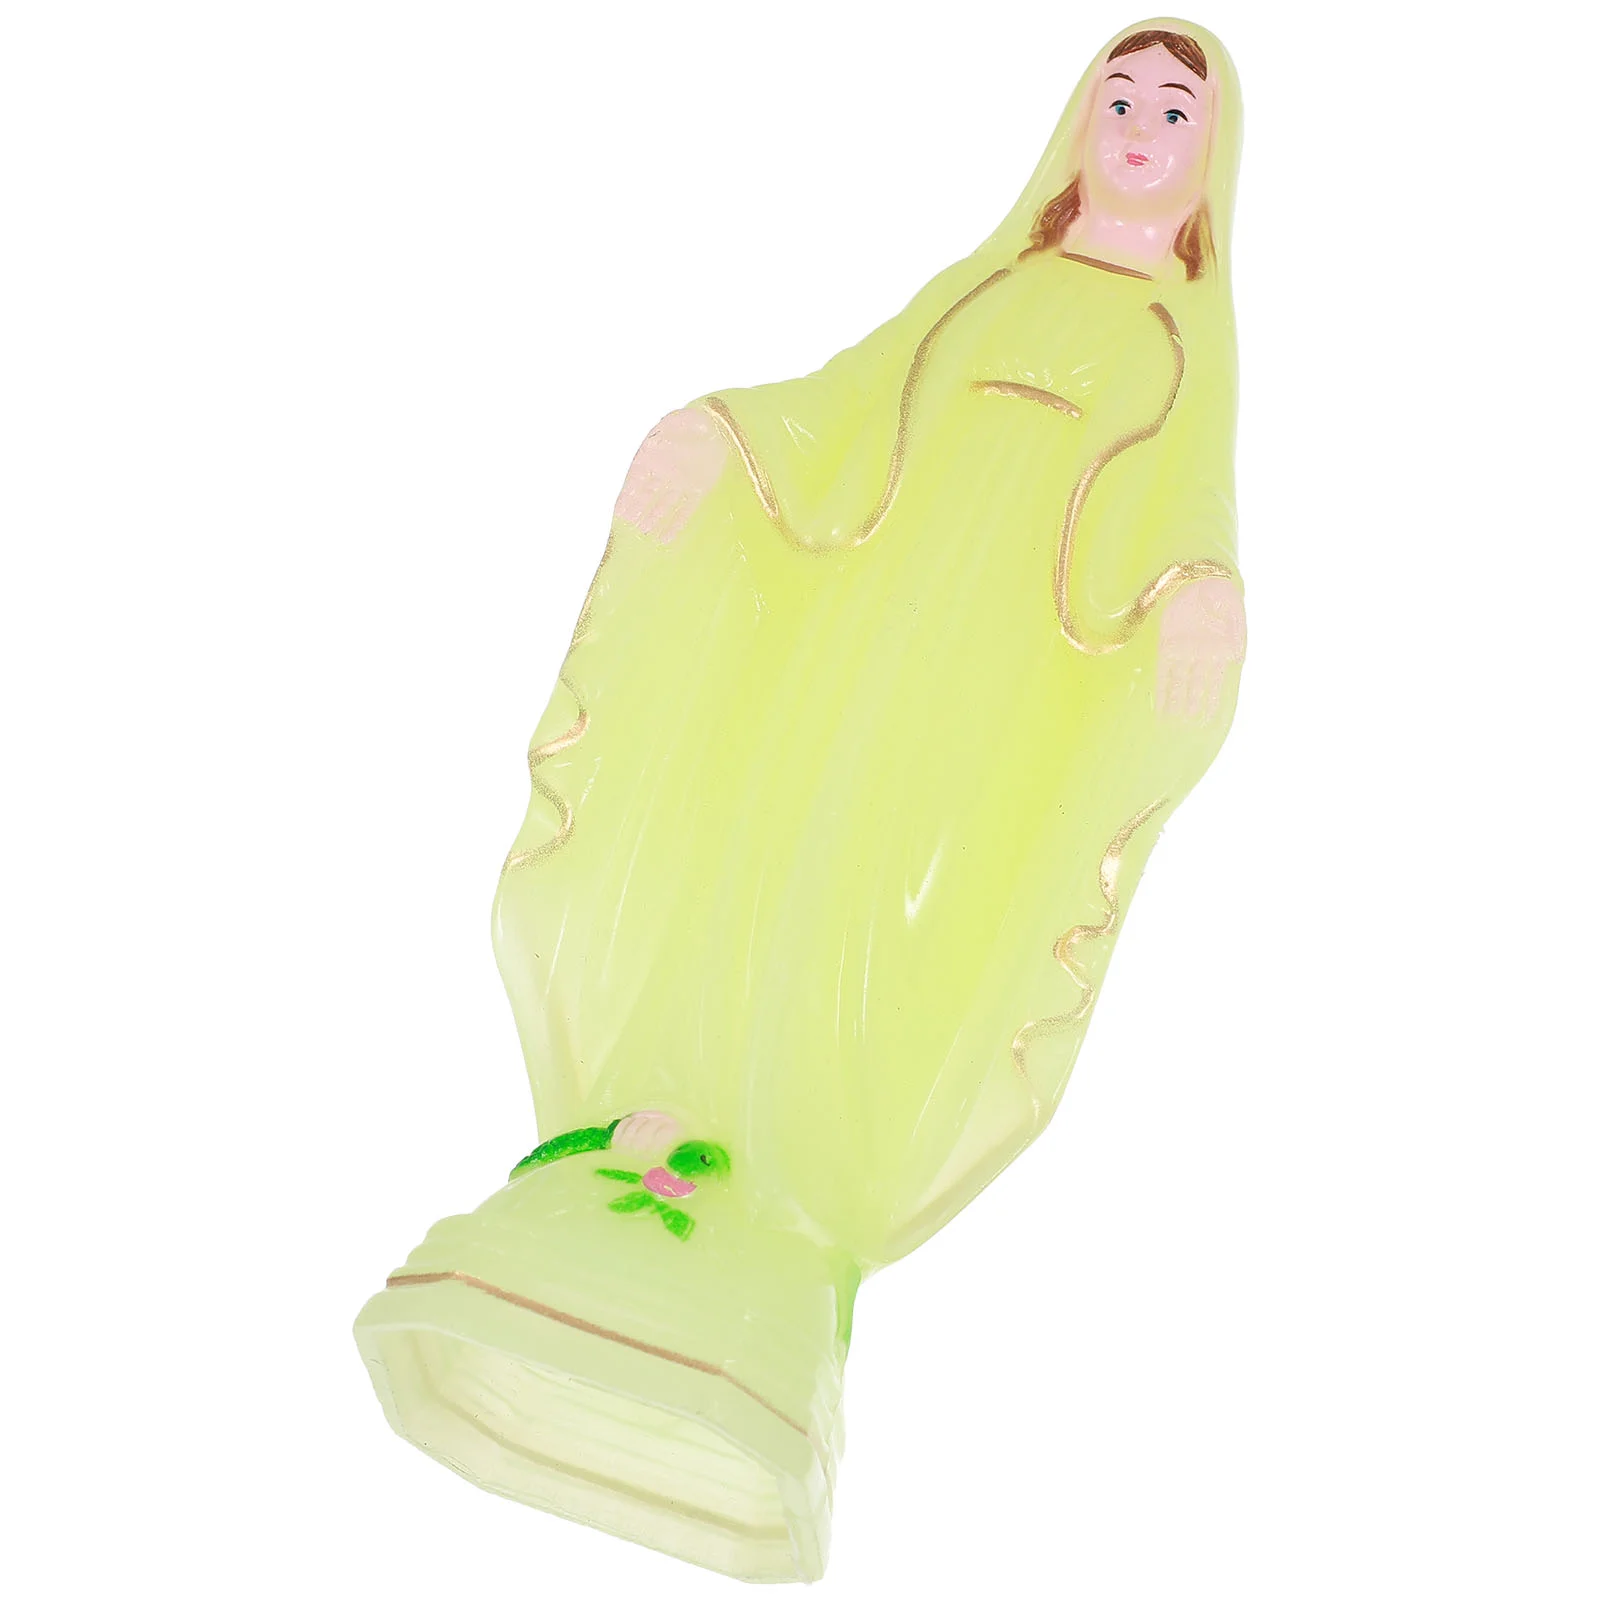 

Our Lady God Ornament Desktop Catholicism Adornment Plastic Craft Virgin Mary Religious Wedding Decorations Tables